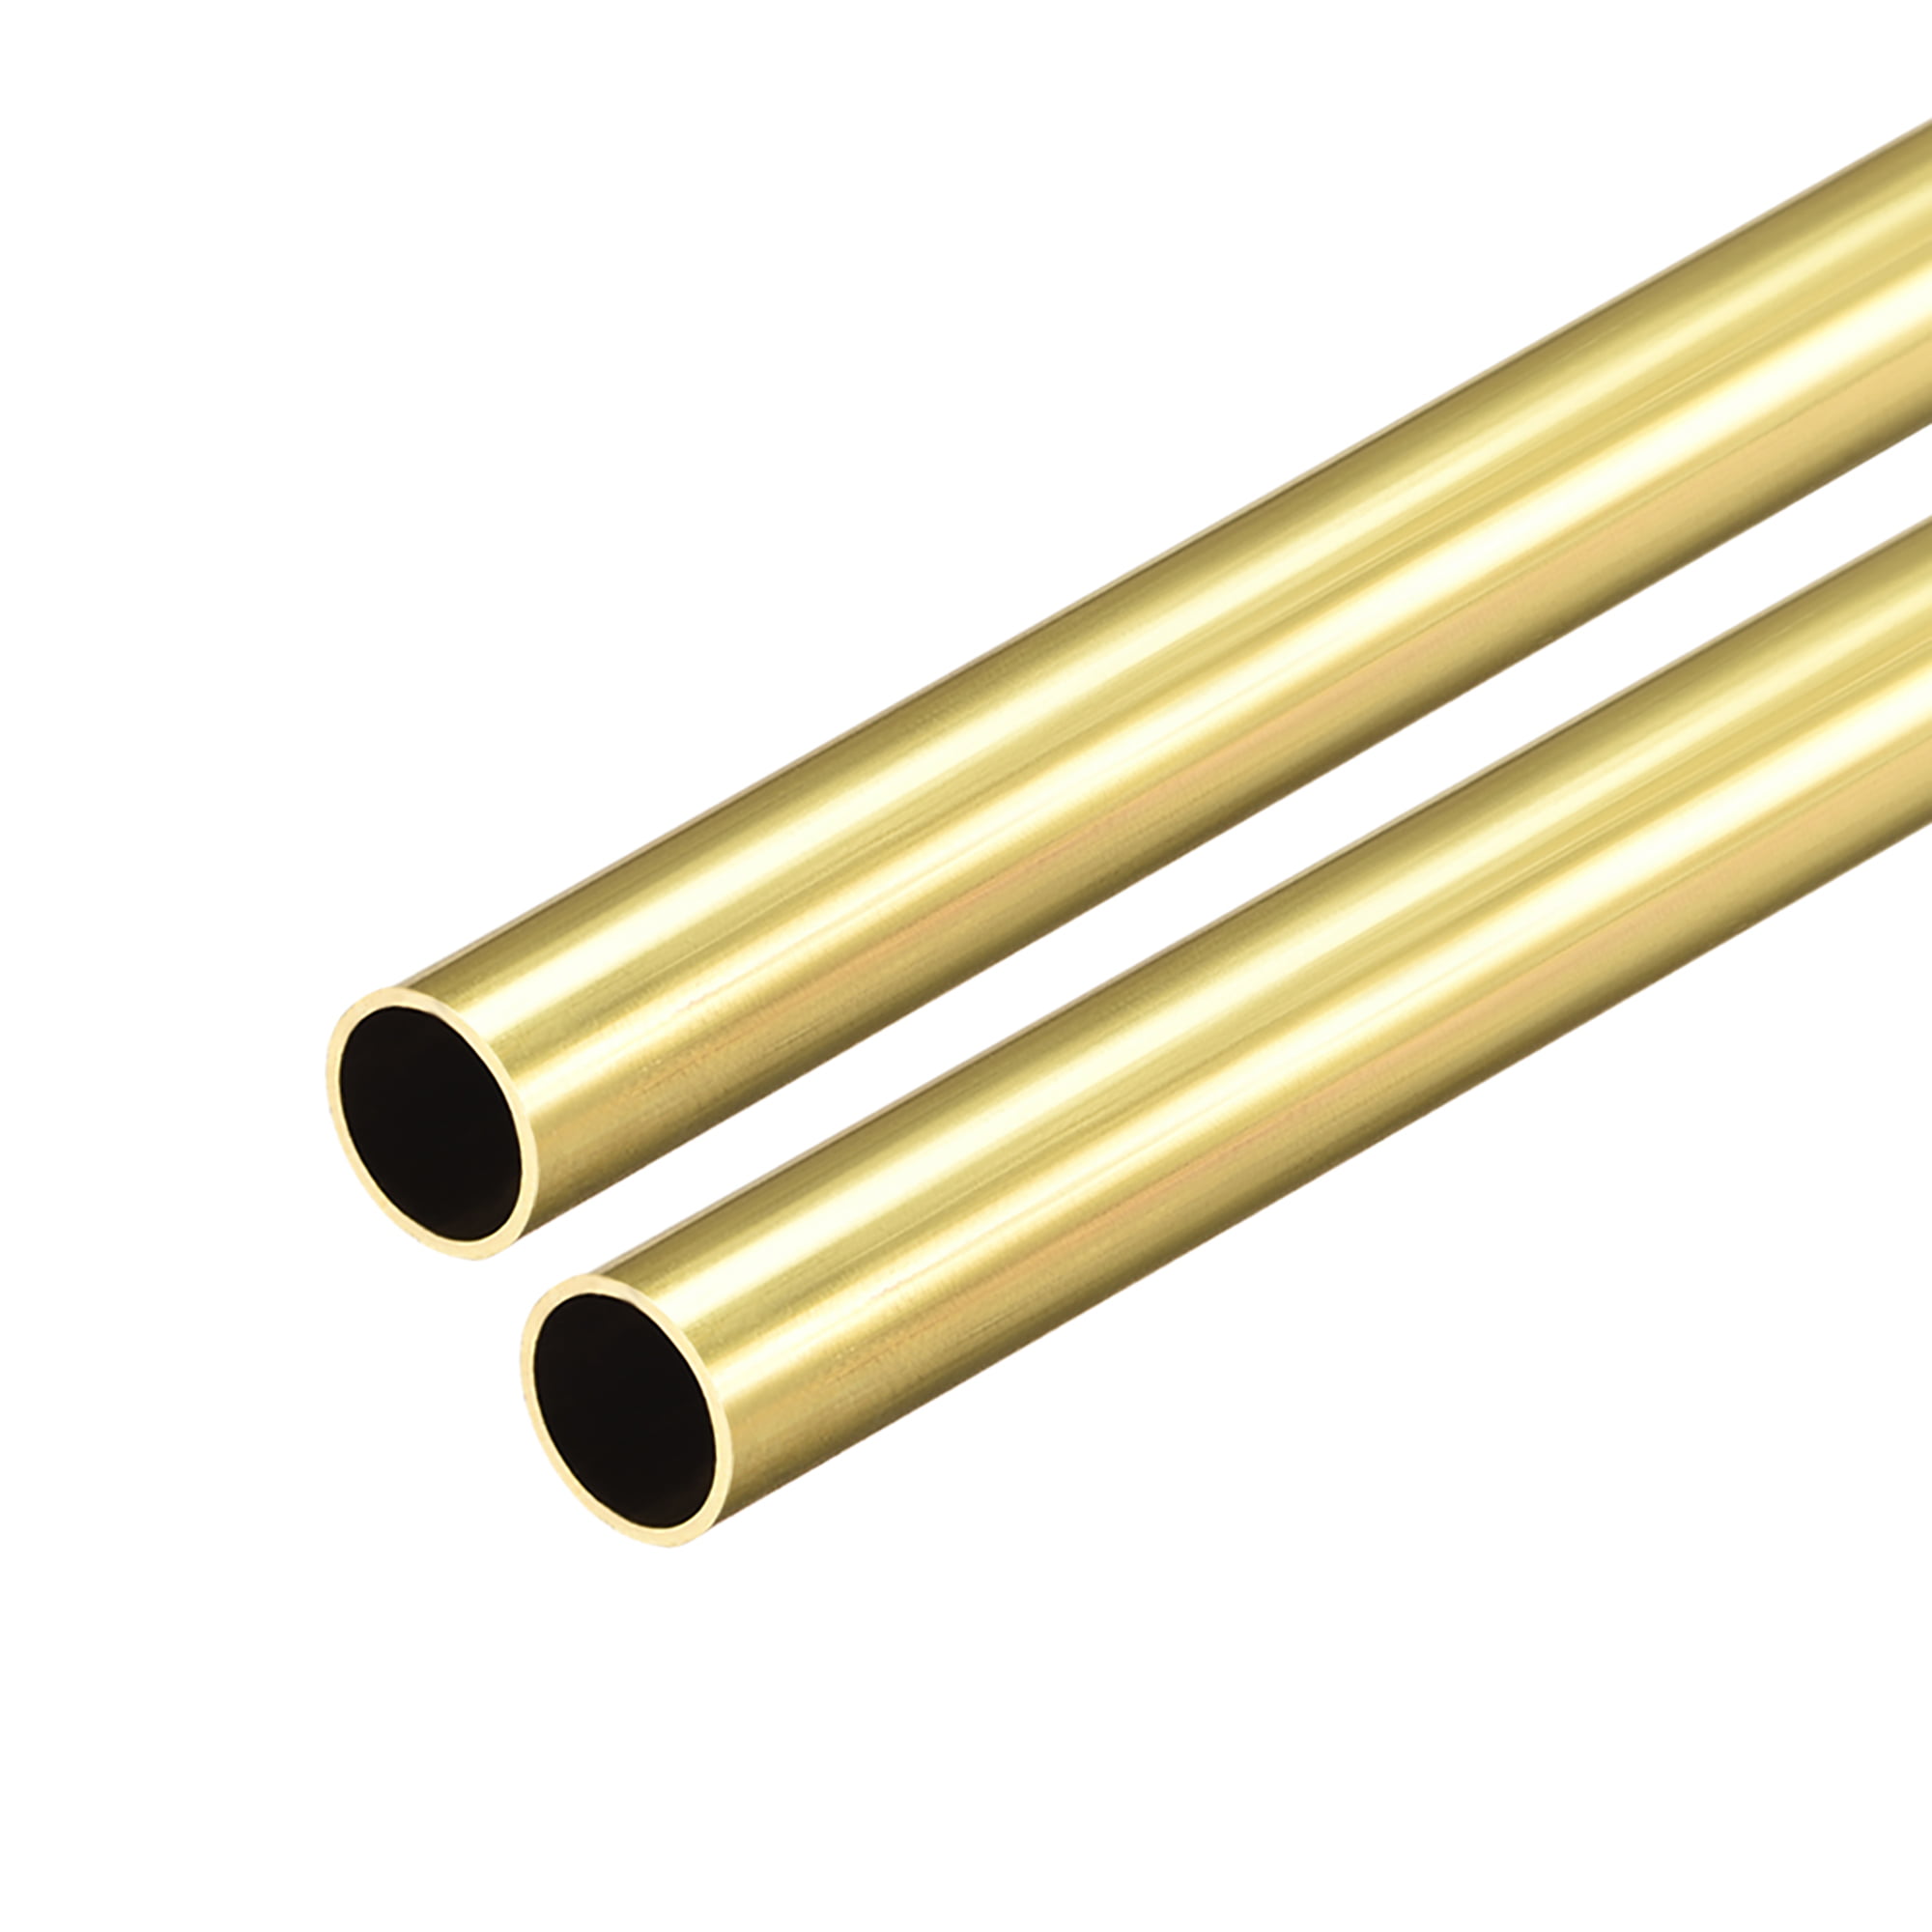 uxcell 7mm x 11mm x 500mm Brass Pipe Tube Round Bar Rod for RC Boat 